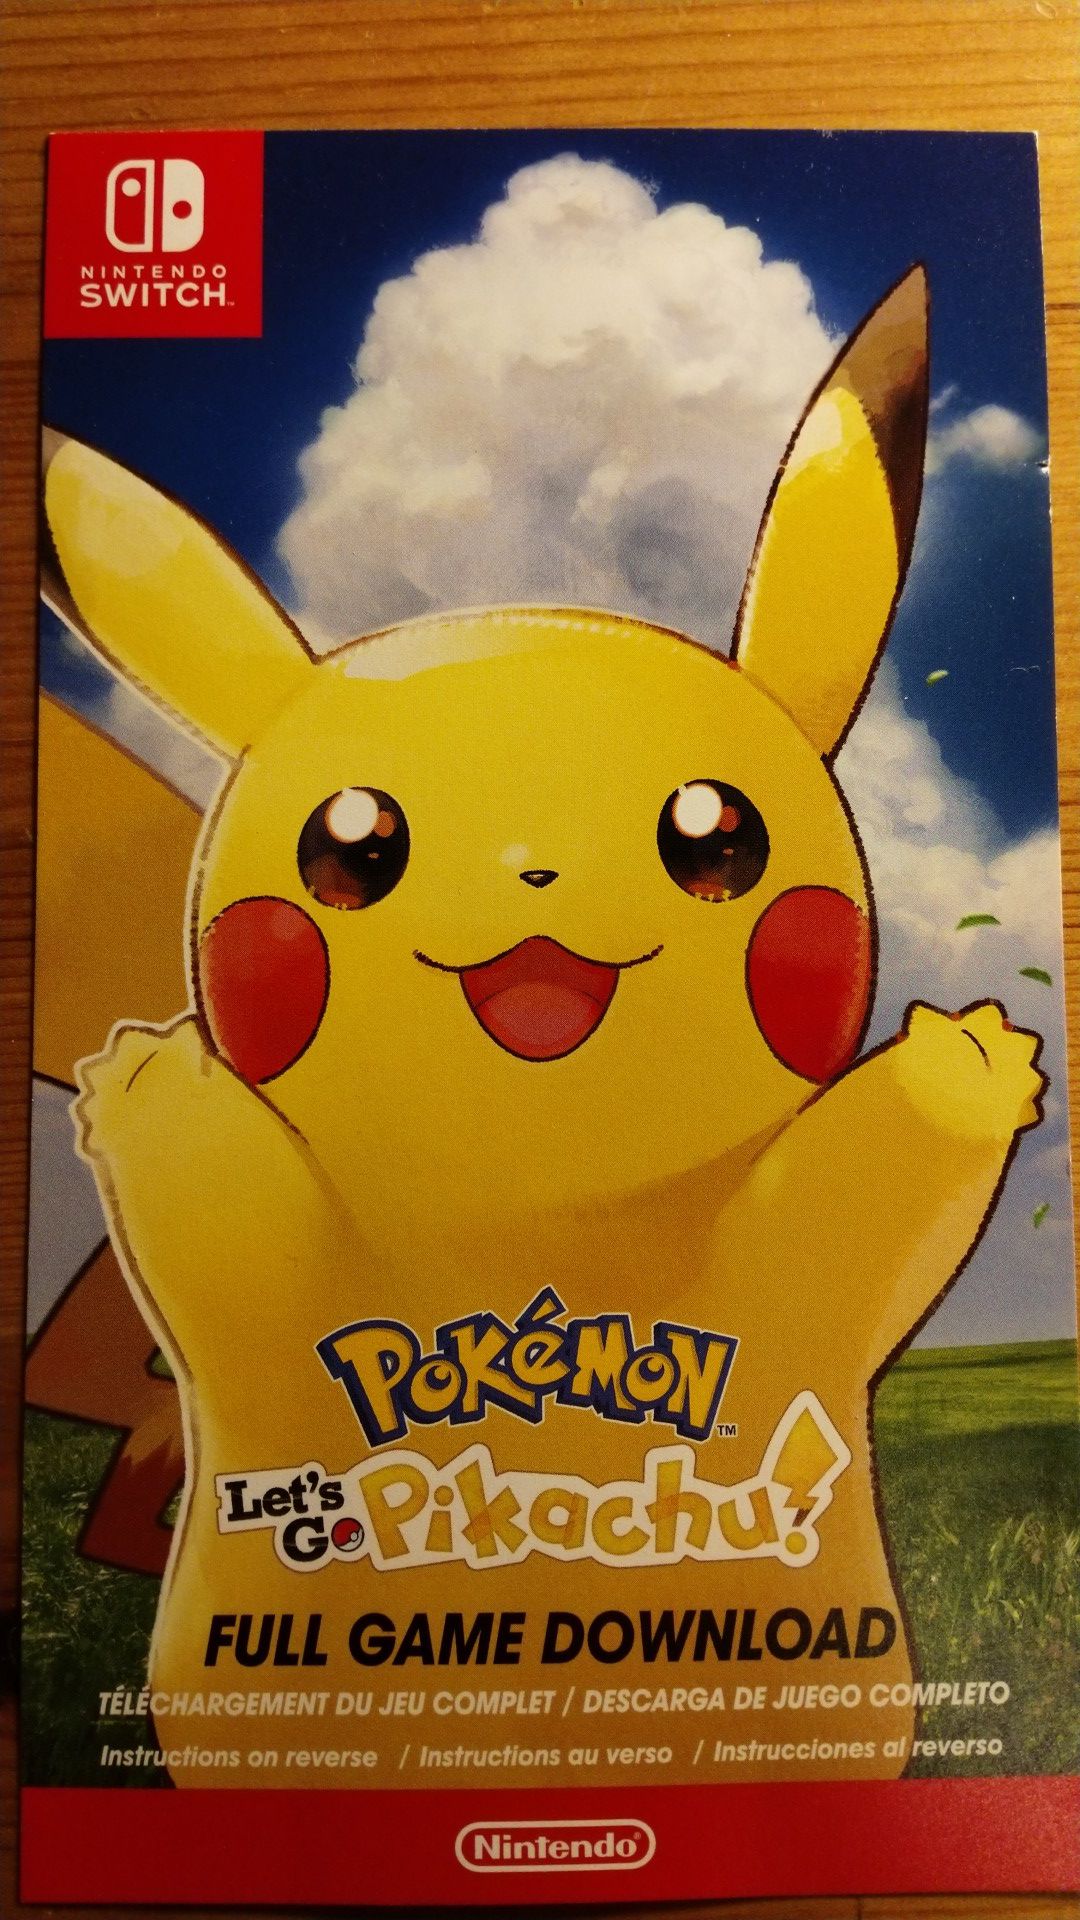 Nintendo Switched Game Download Code - Pokemon Let's Go Pikachu